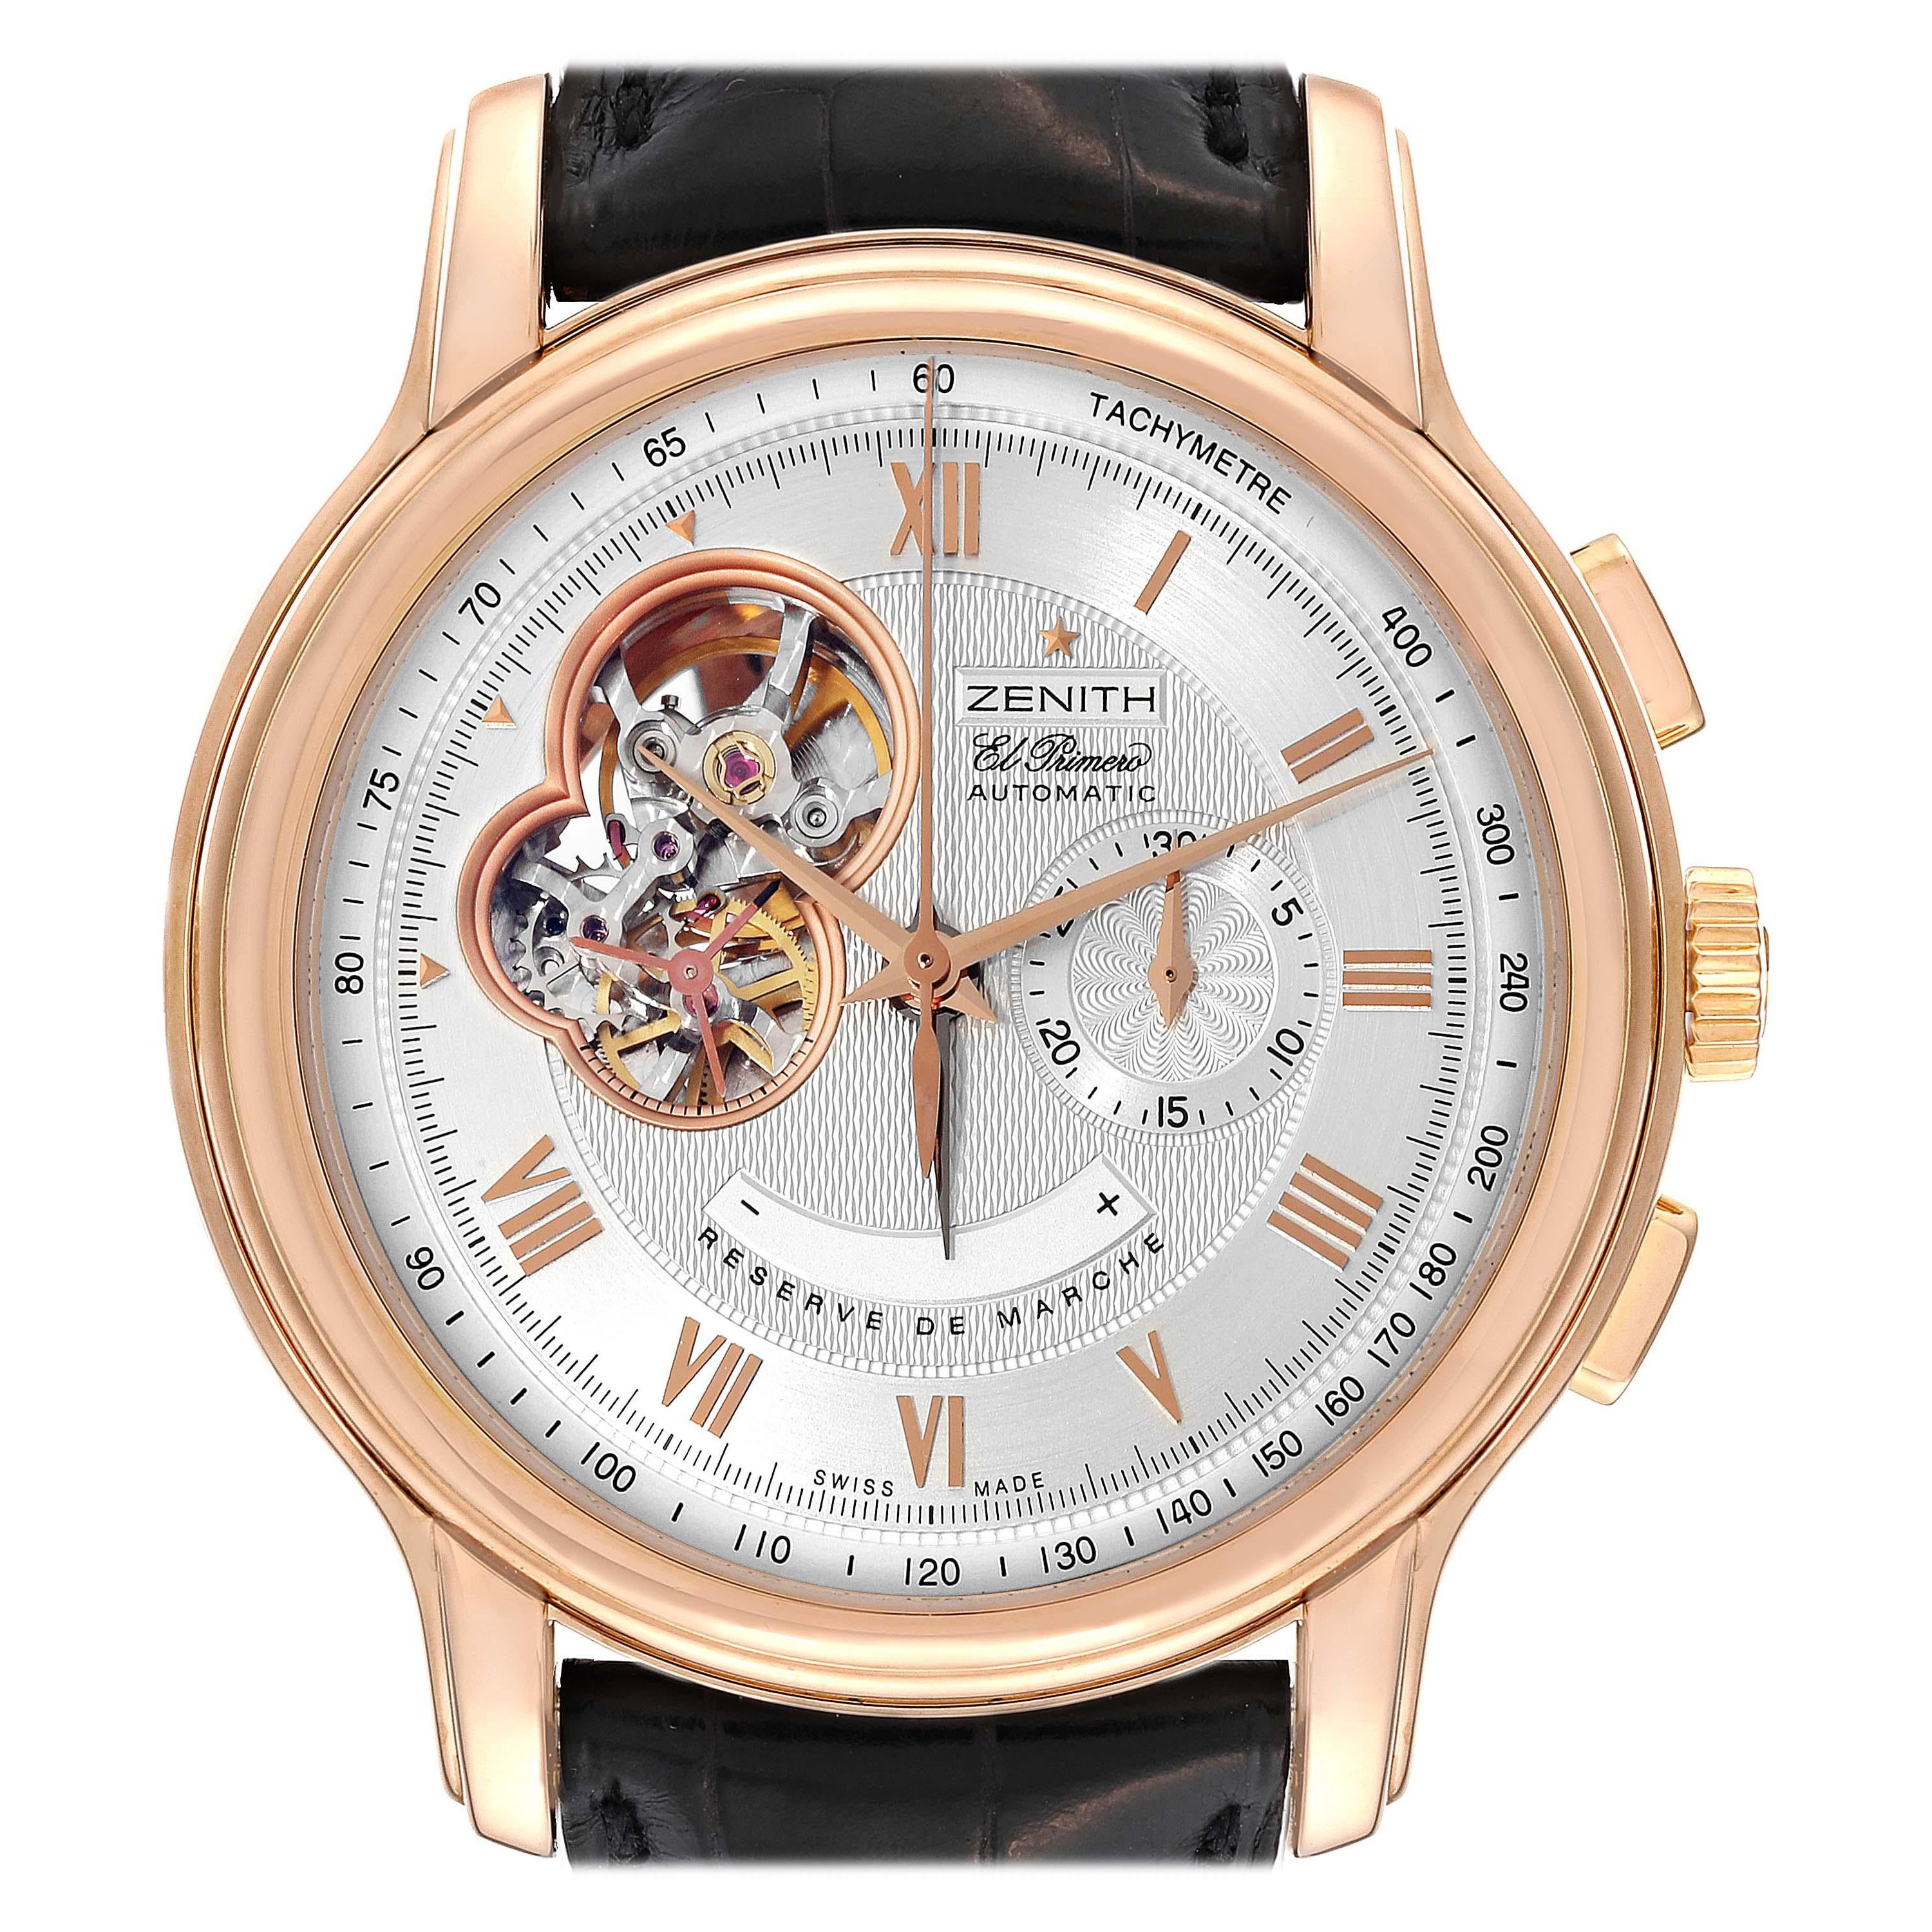 Zenith Chronomaster XXT Open Rose Gold Mens Watch 18.1260.4021 Box Papers For Sale